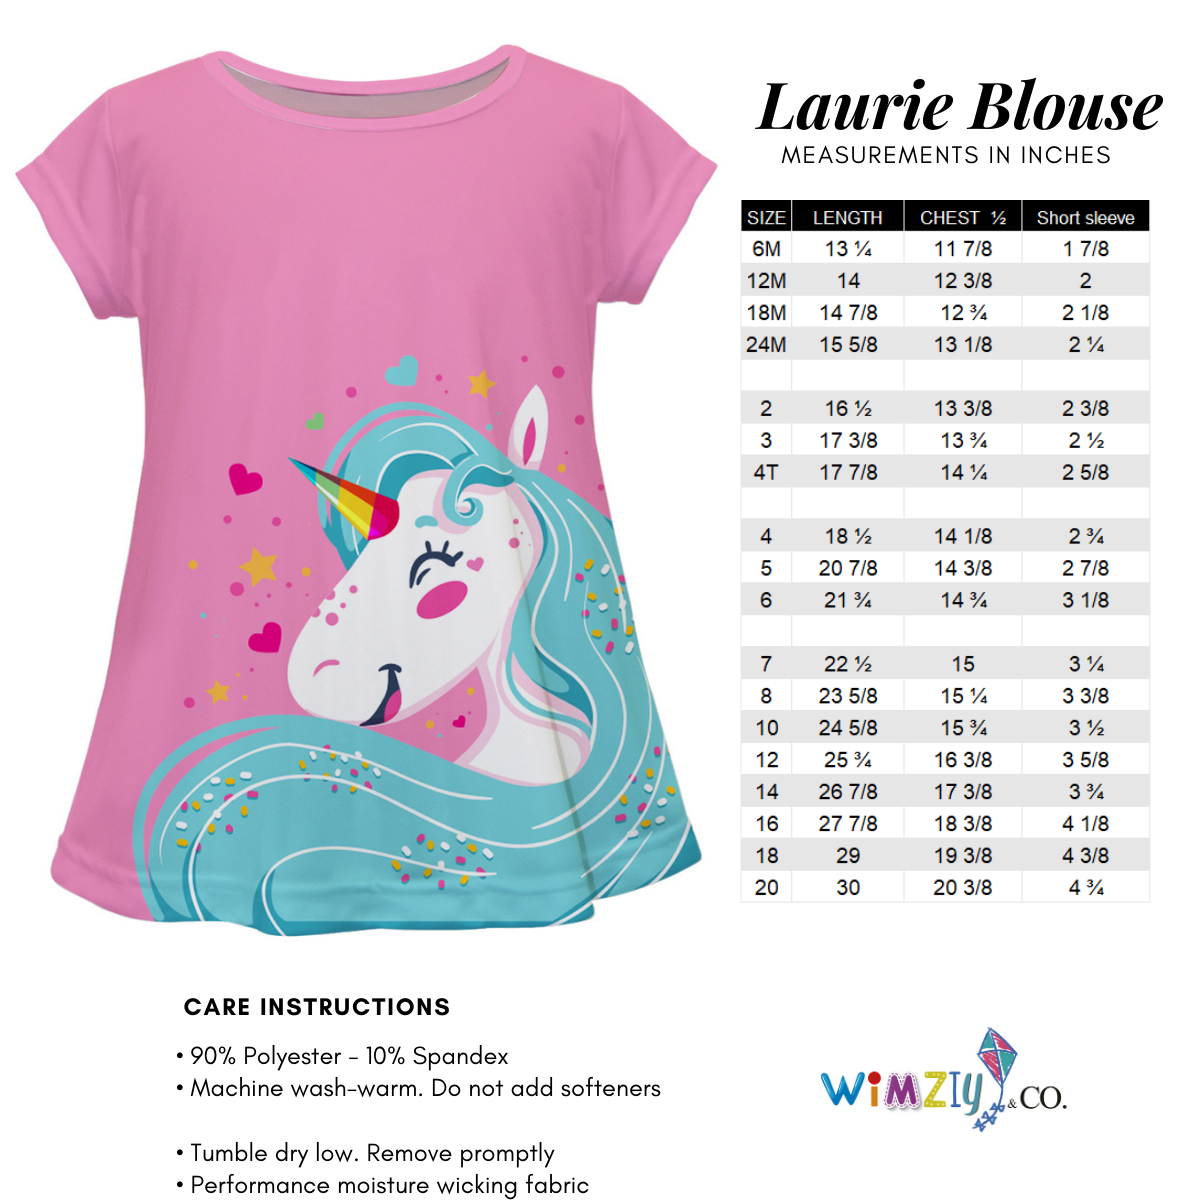 Marker Name White Short Sleeve Laurie Top - Wimziy&Co.